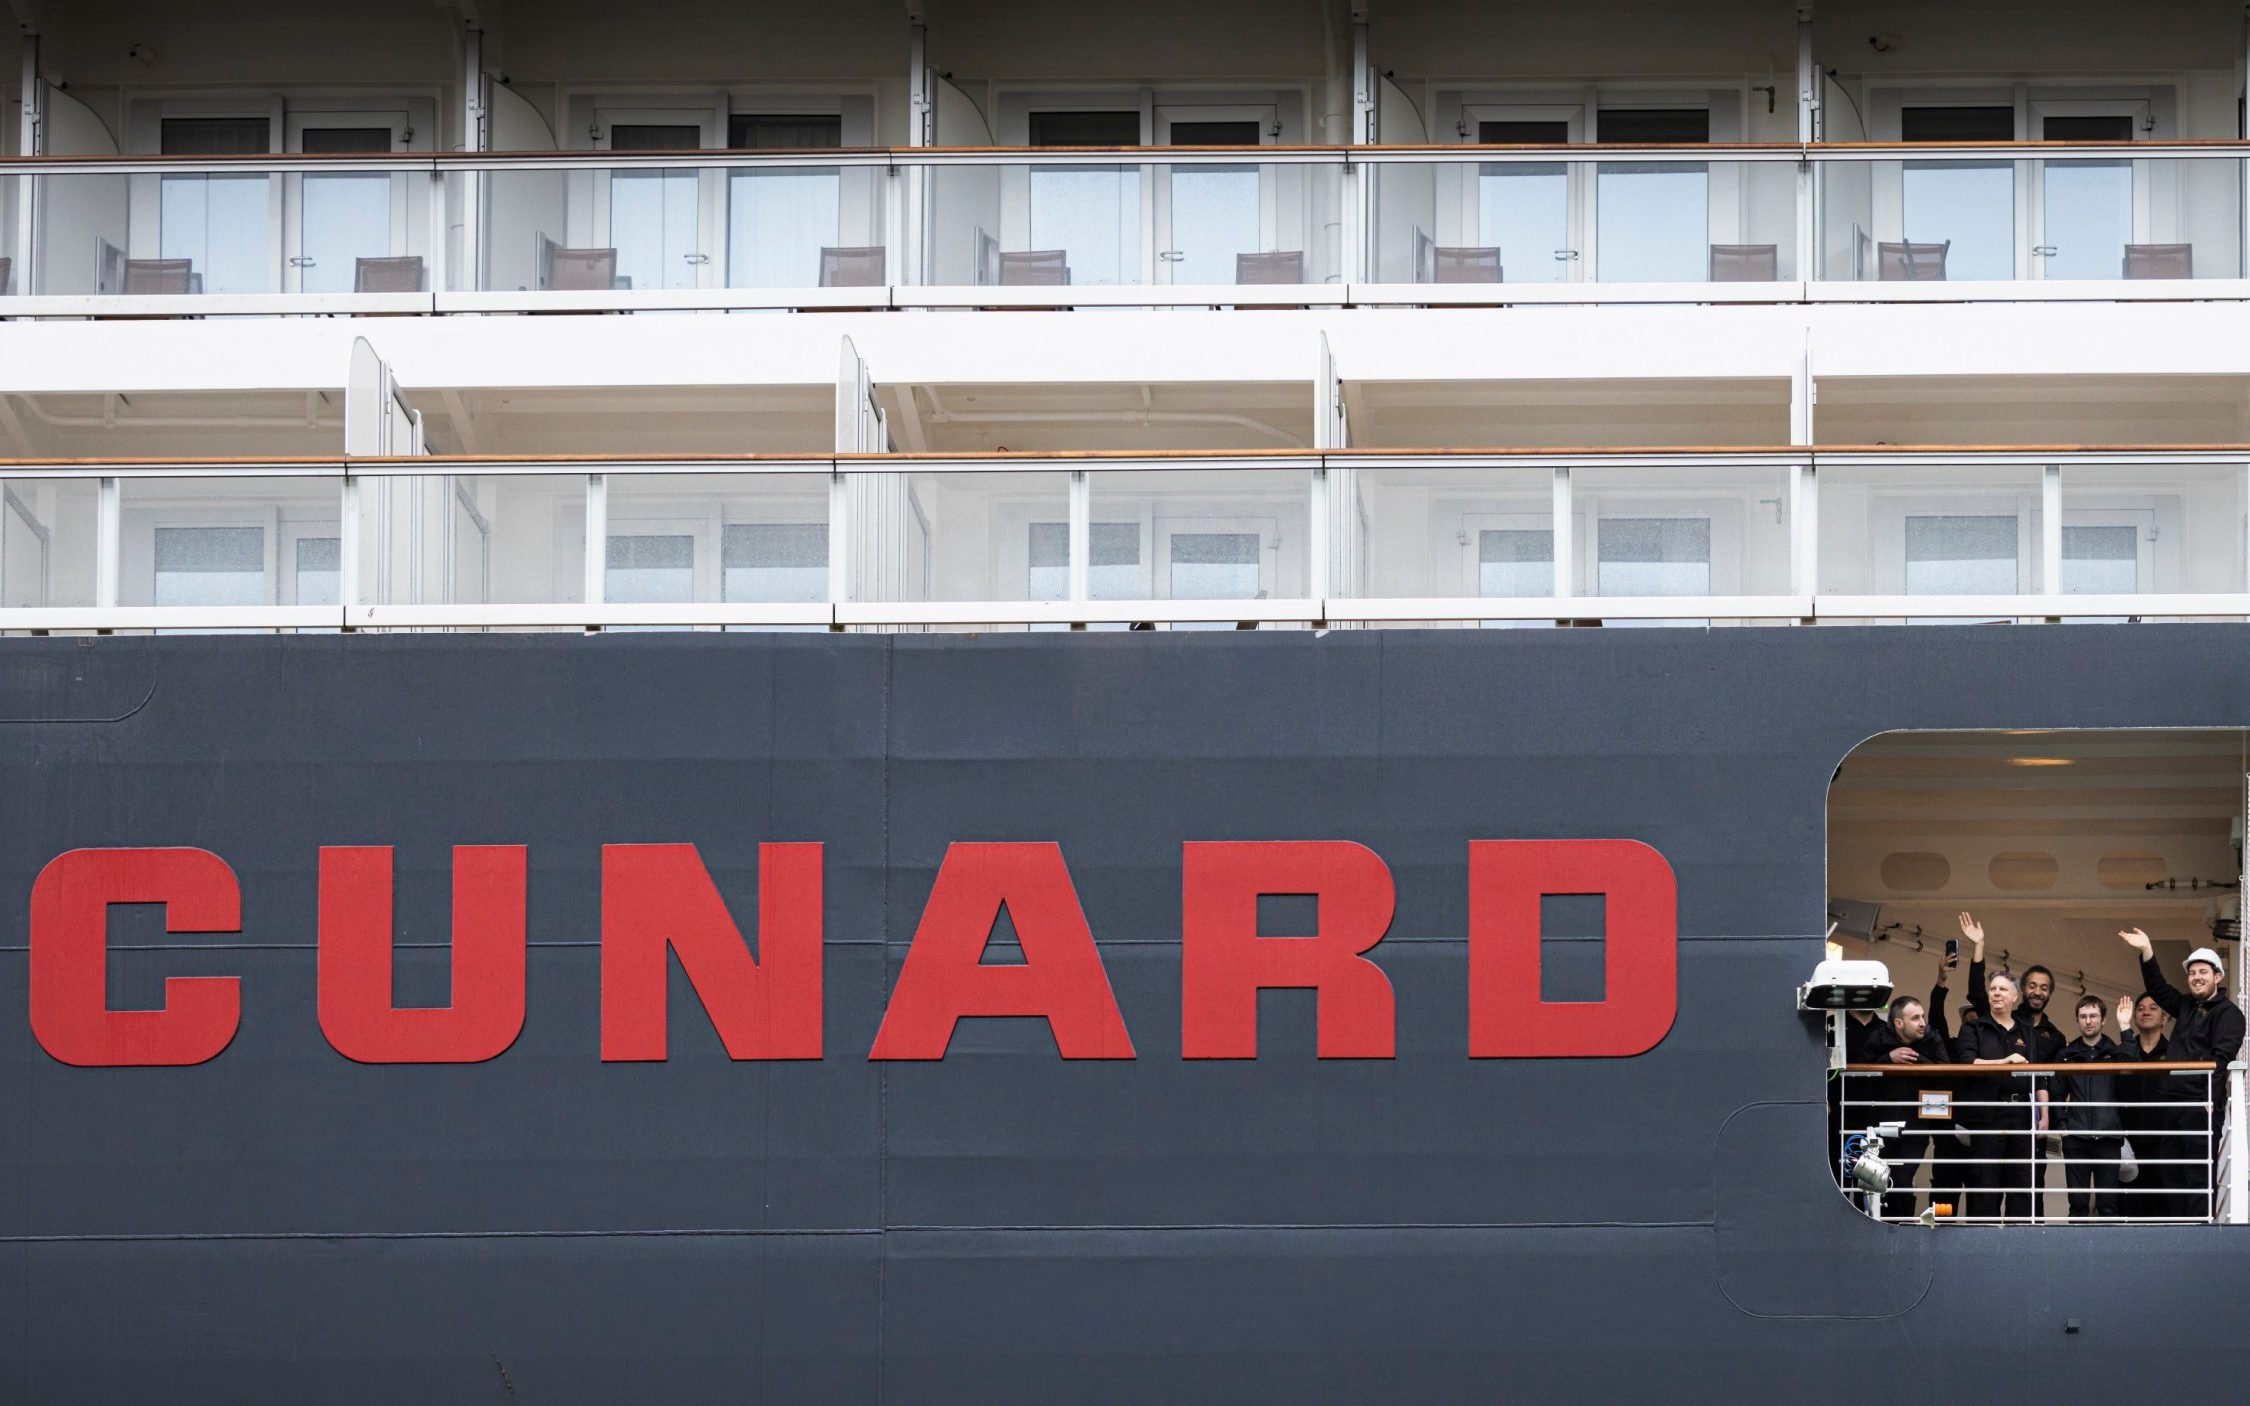 a look inside the £479m queen anne, cunard’s first new cruise ship in 14 years